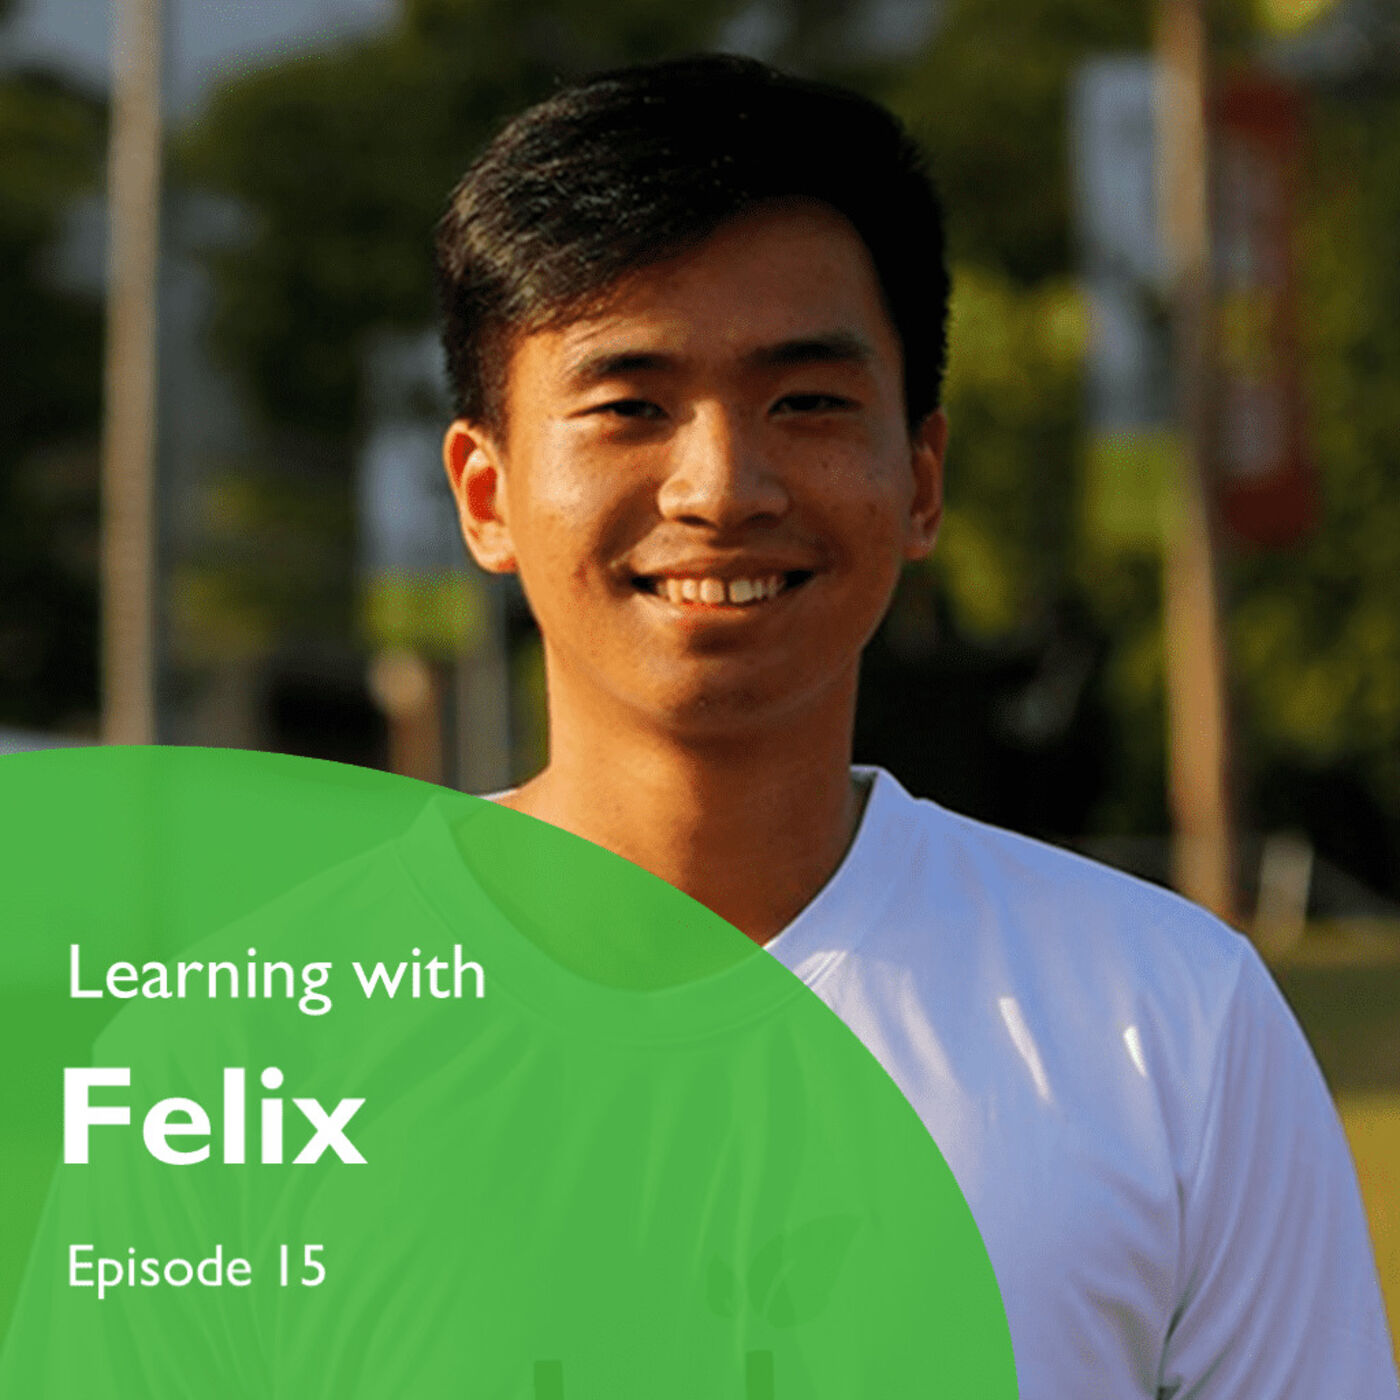 The Best Approach to Developing Soft Skills | Felix | EP 15